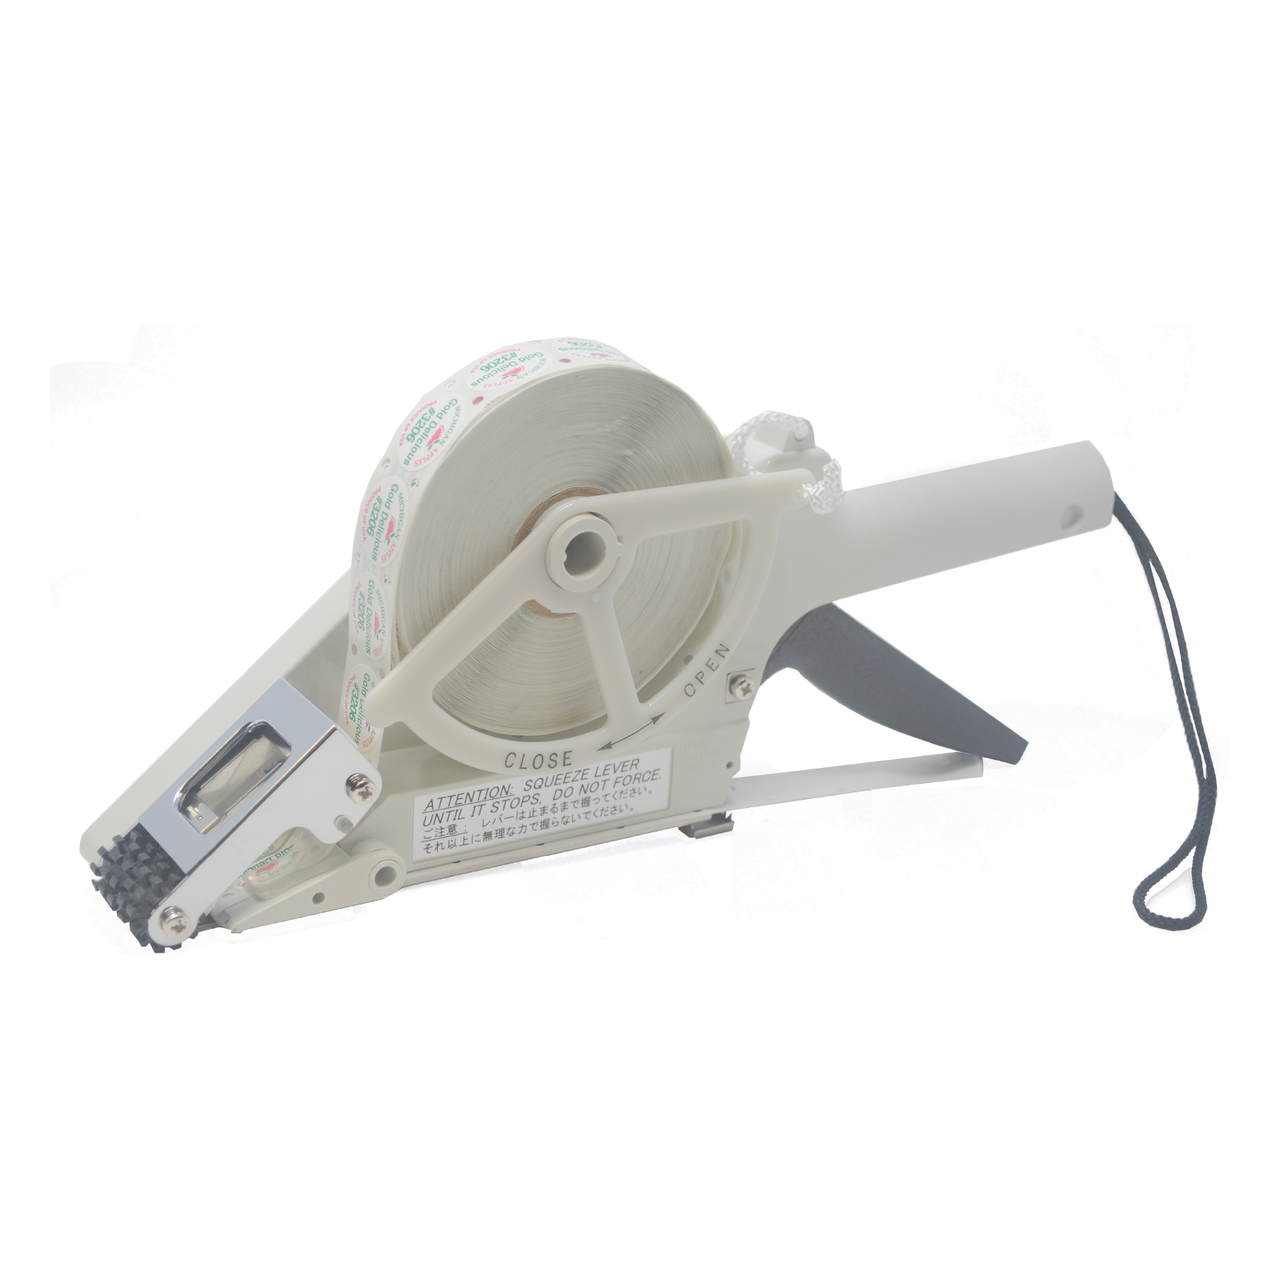 Hand-Held Label Dispenser Applicator Machine for Labels up to 3.93 x 2.36  Wide